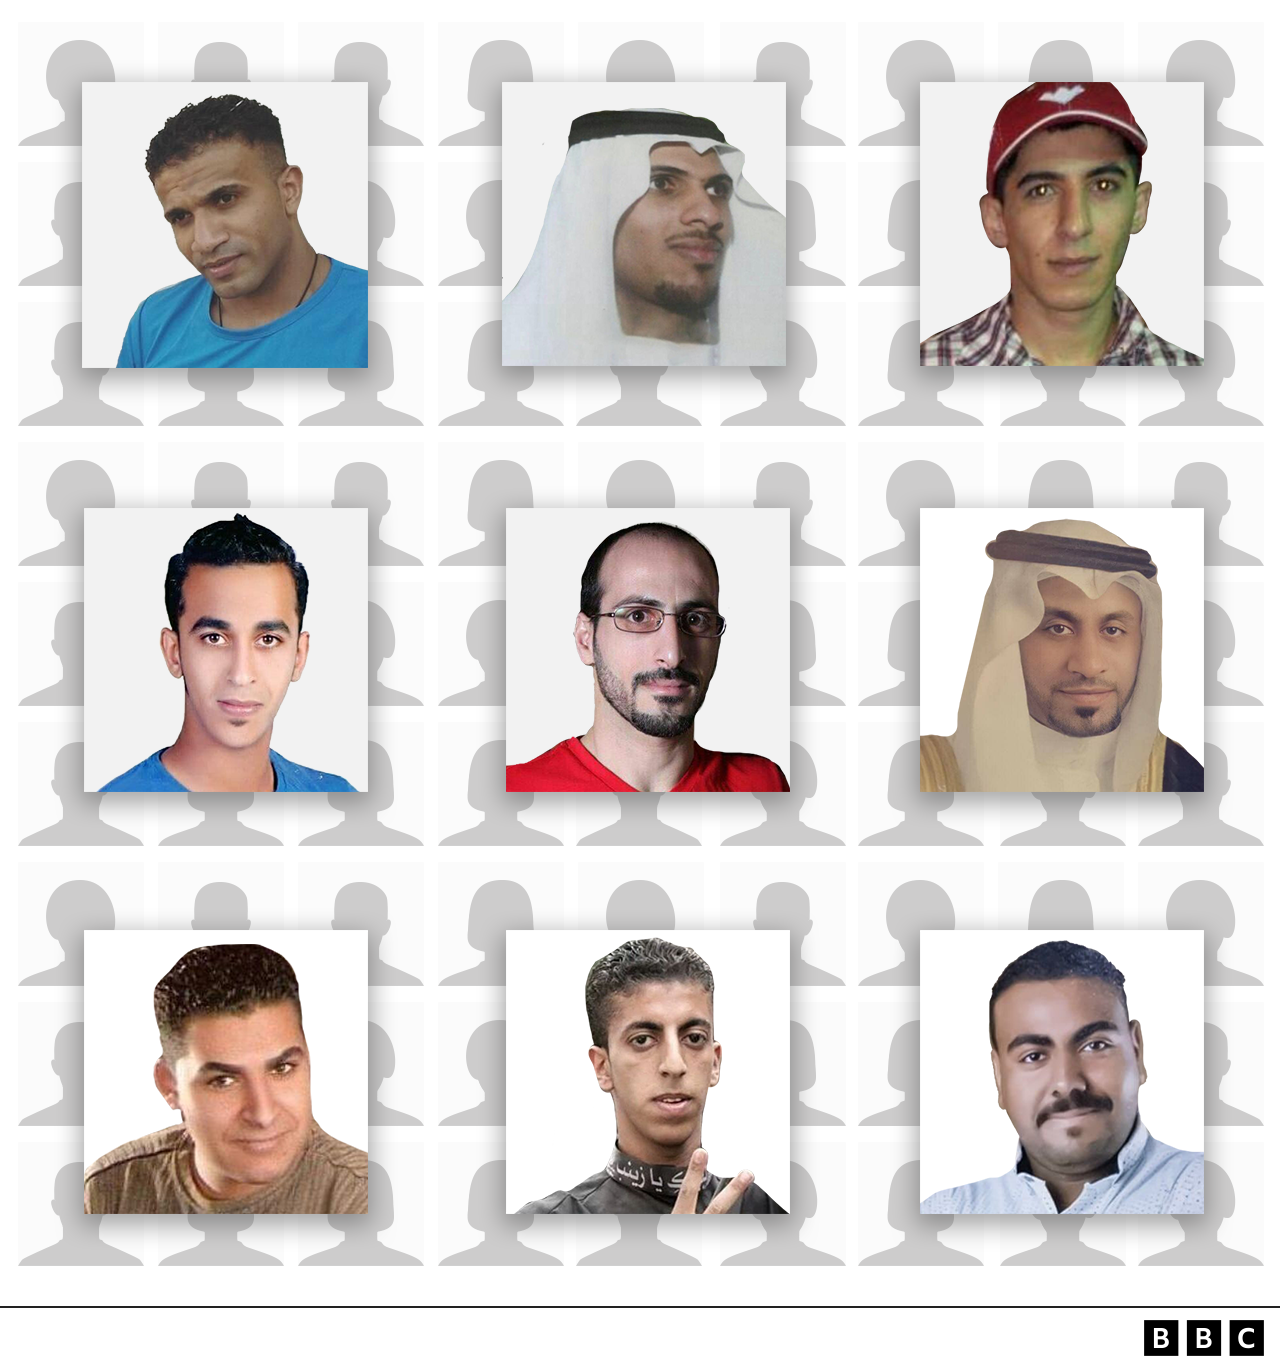 Images showing nine of the 81 prisoners who were executed on 12 March 2022